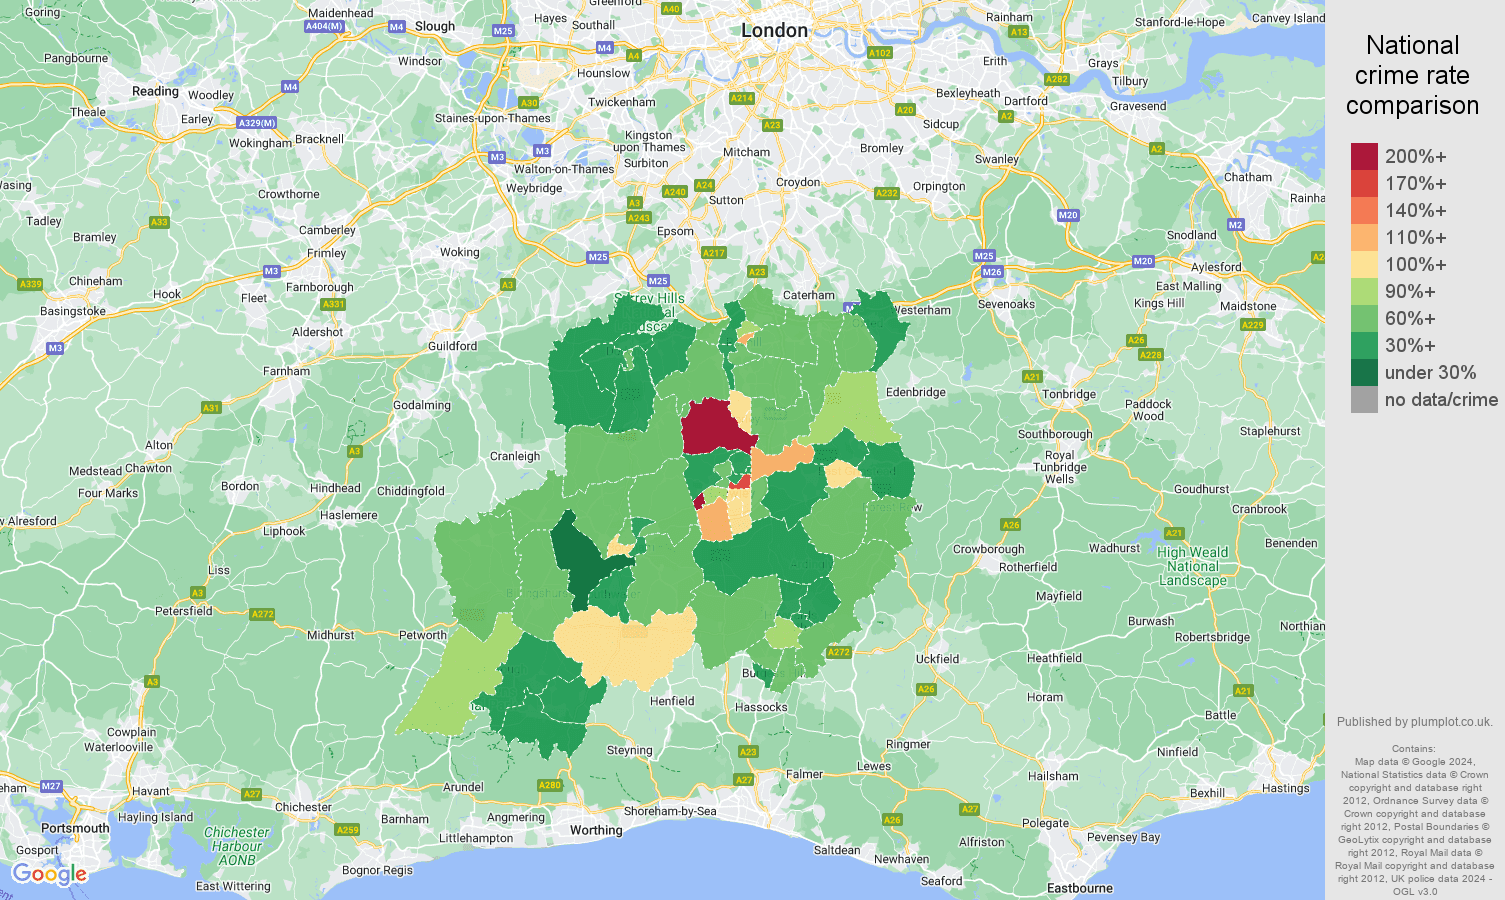 Redhill other theft crime rate comparison map